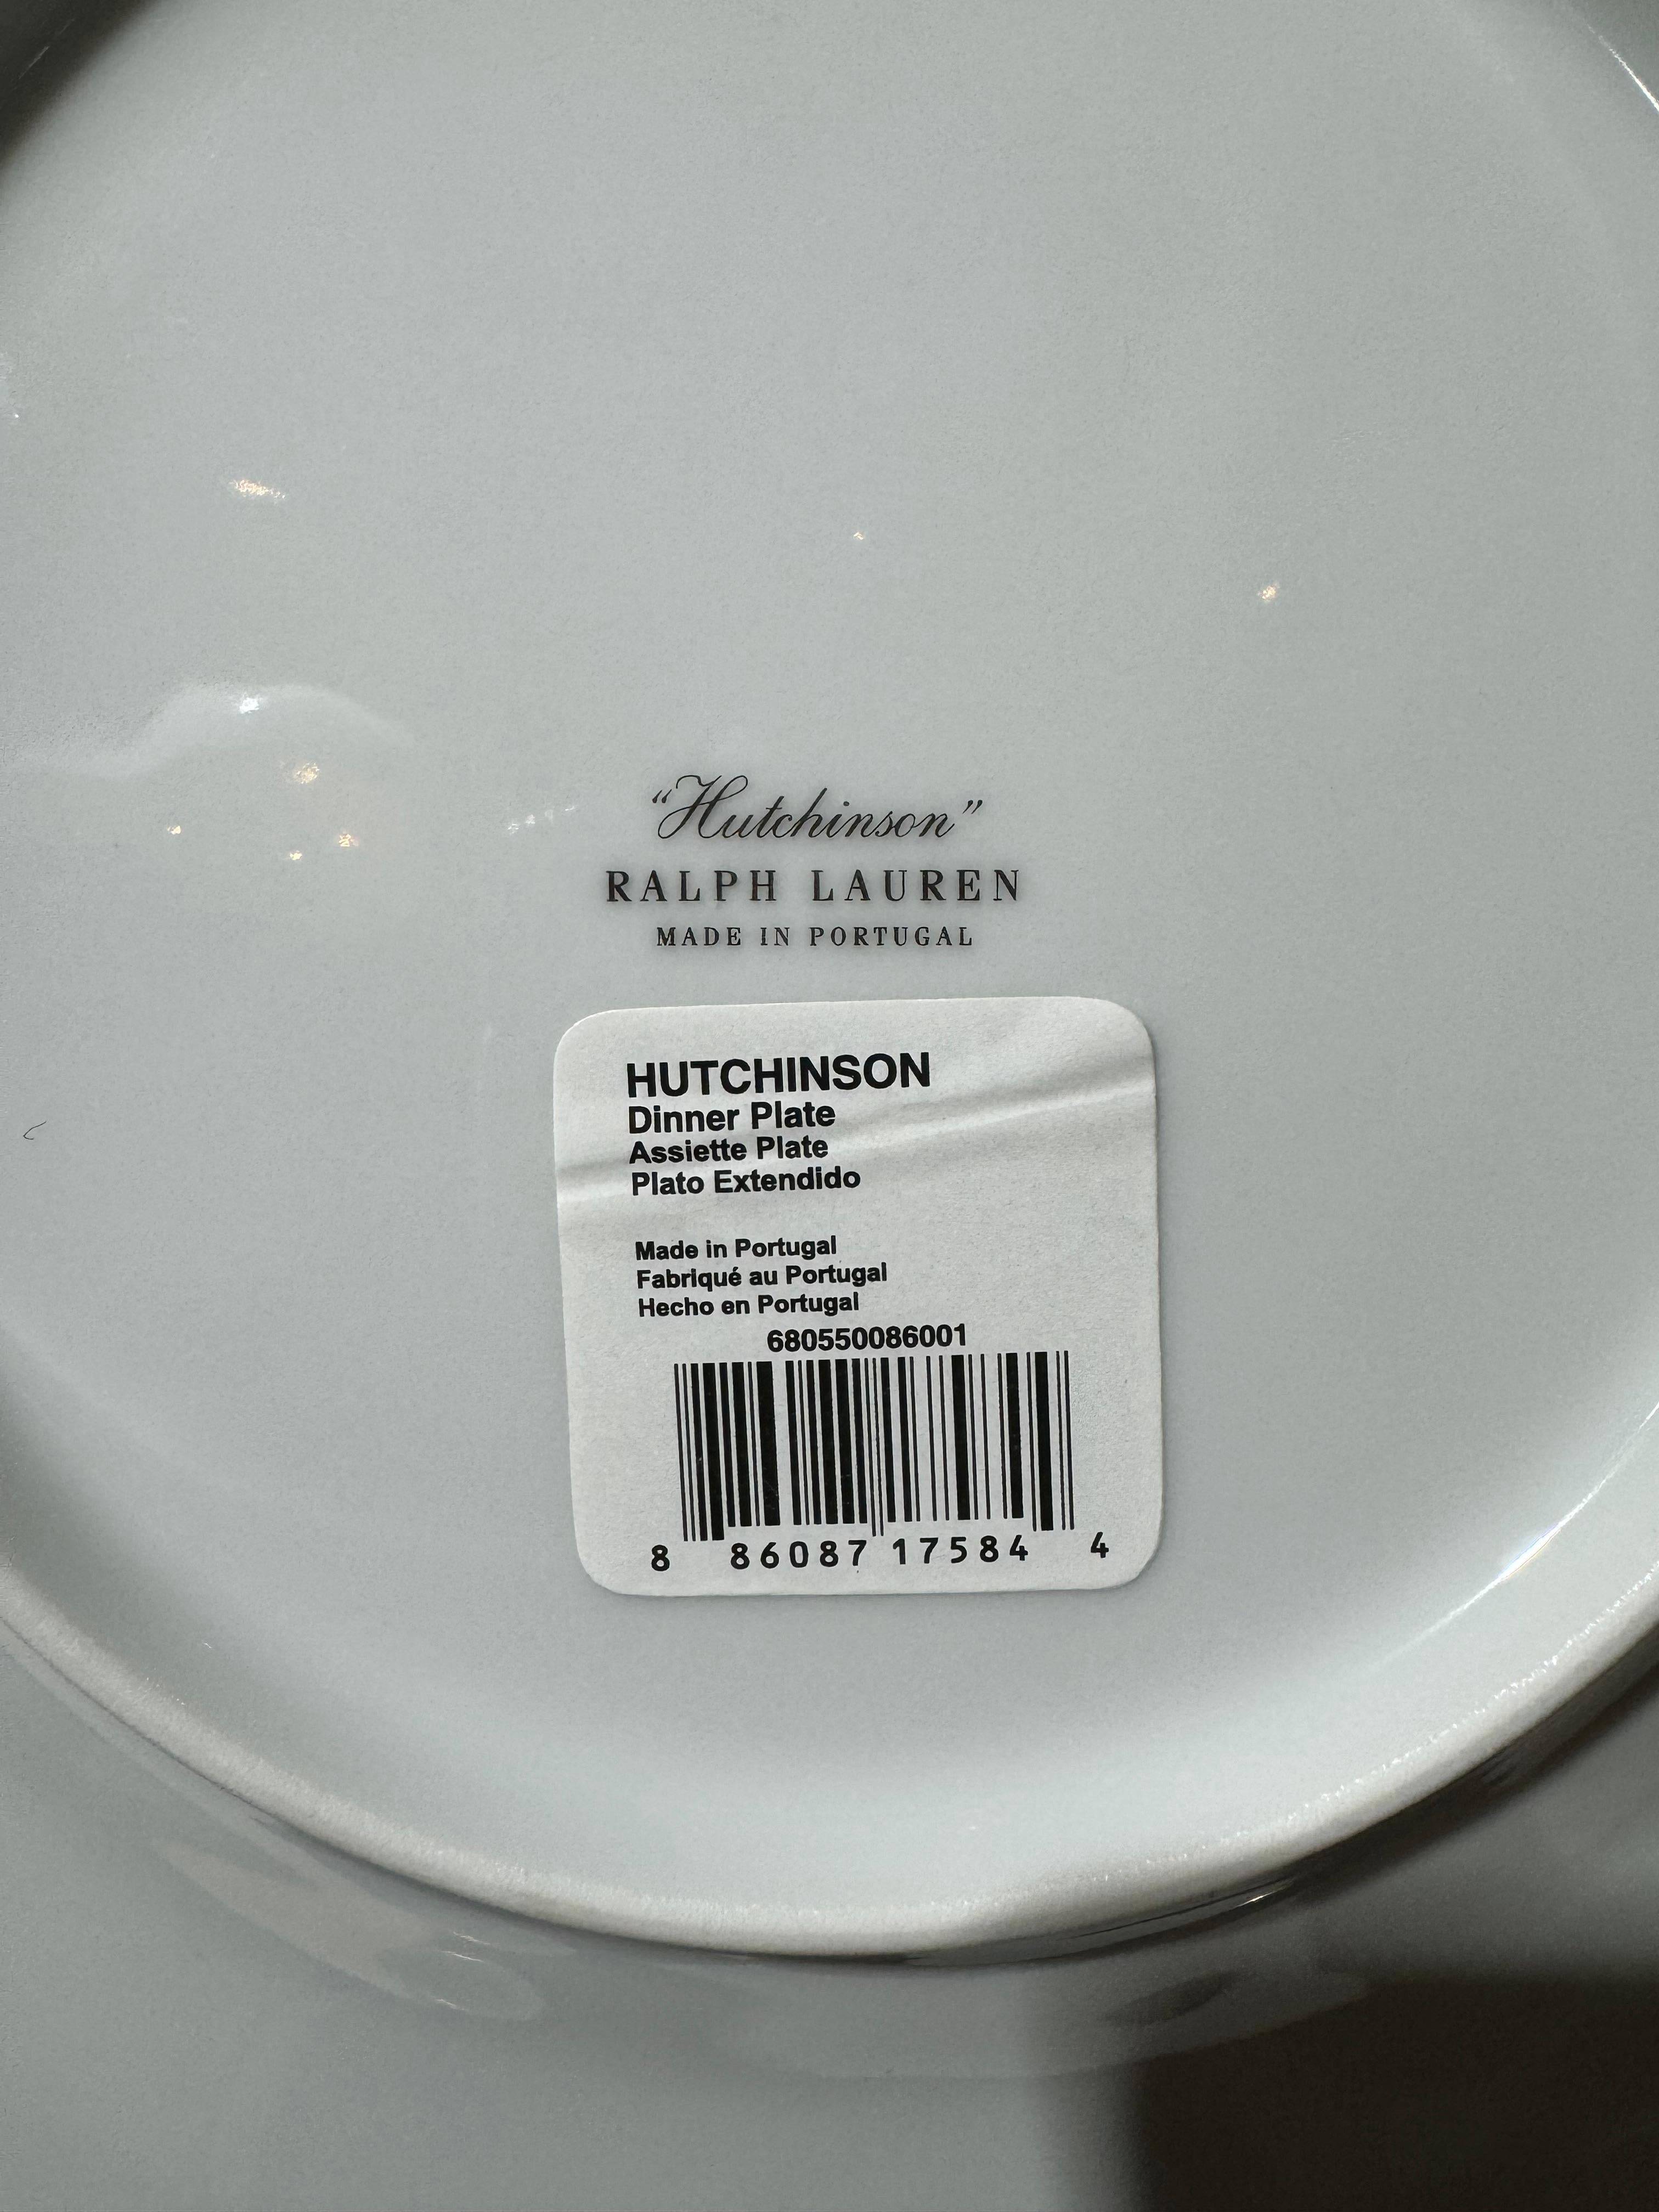 Ralph Lauren Hutchinson Porcelain Dinnerware~ set of 6 place settings In Excellent Condition For Sale In New York, NY